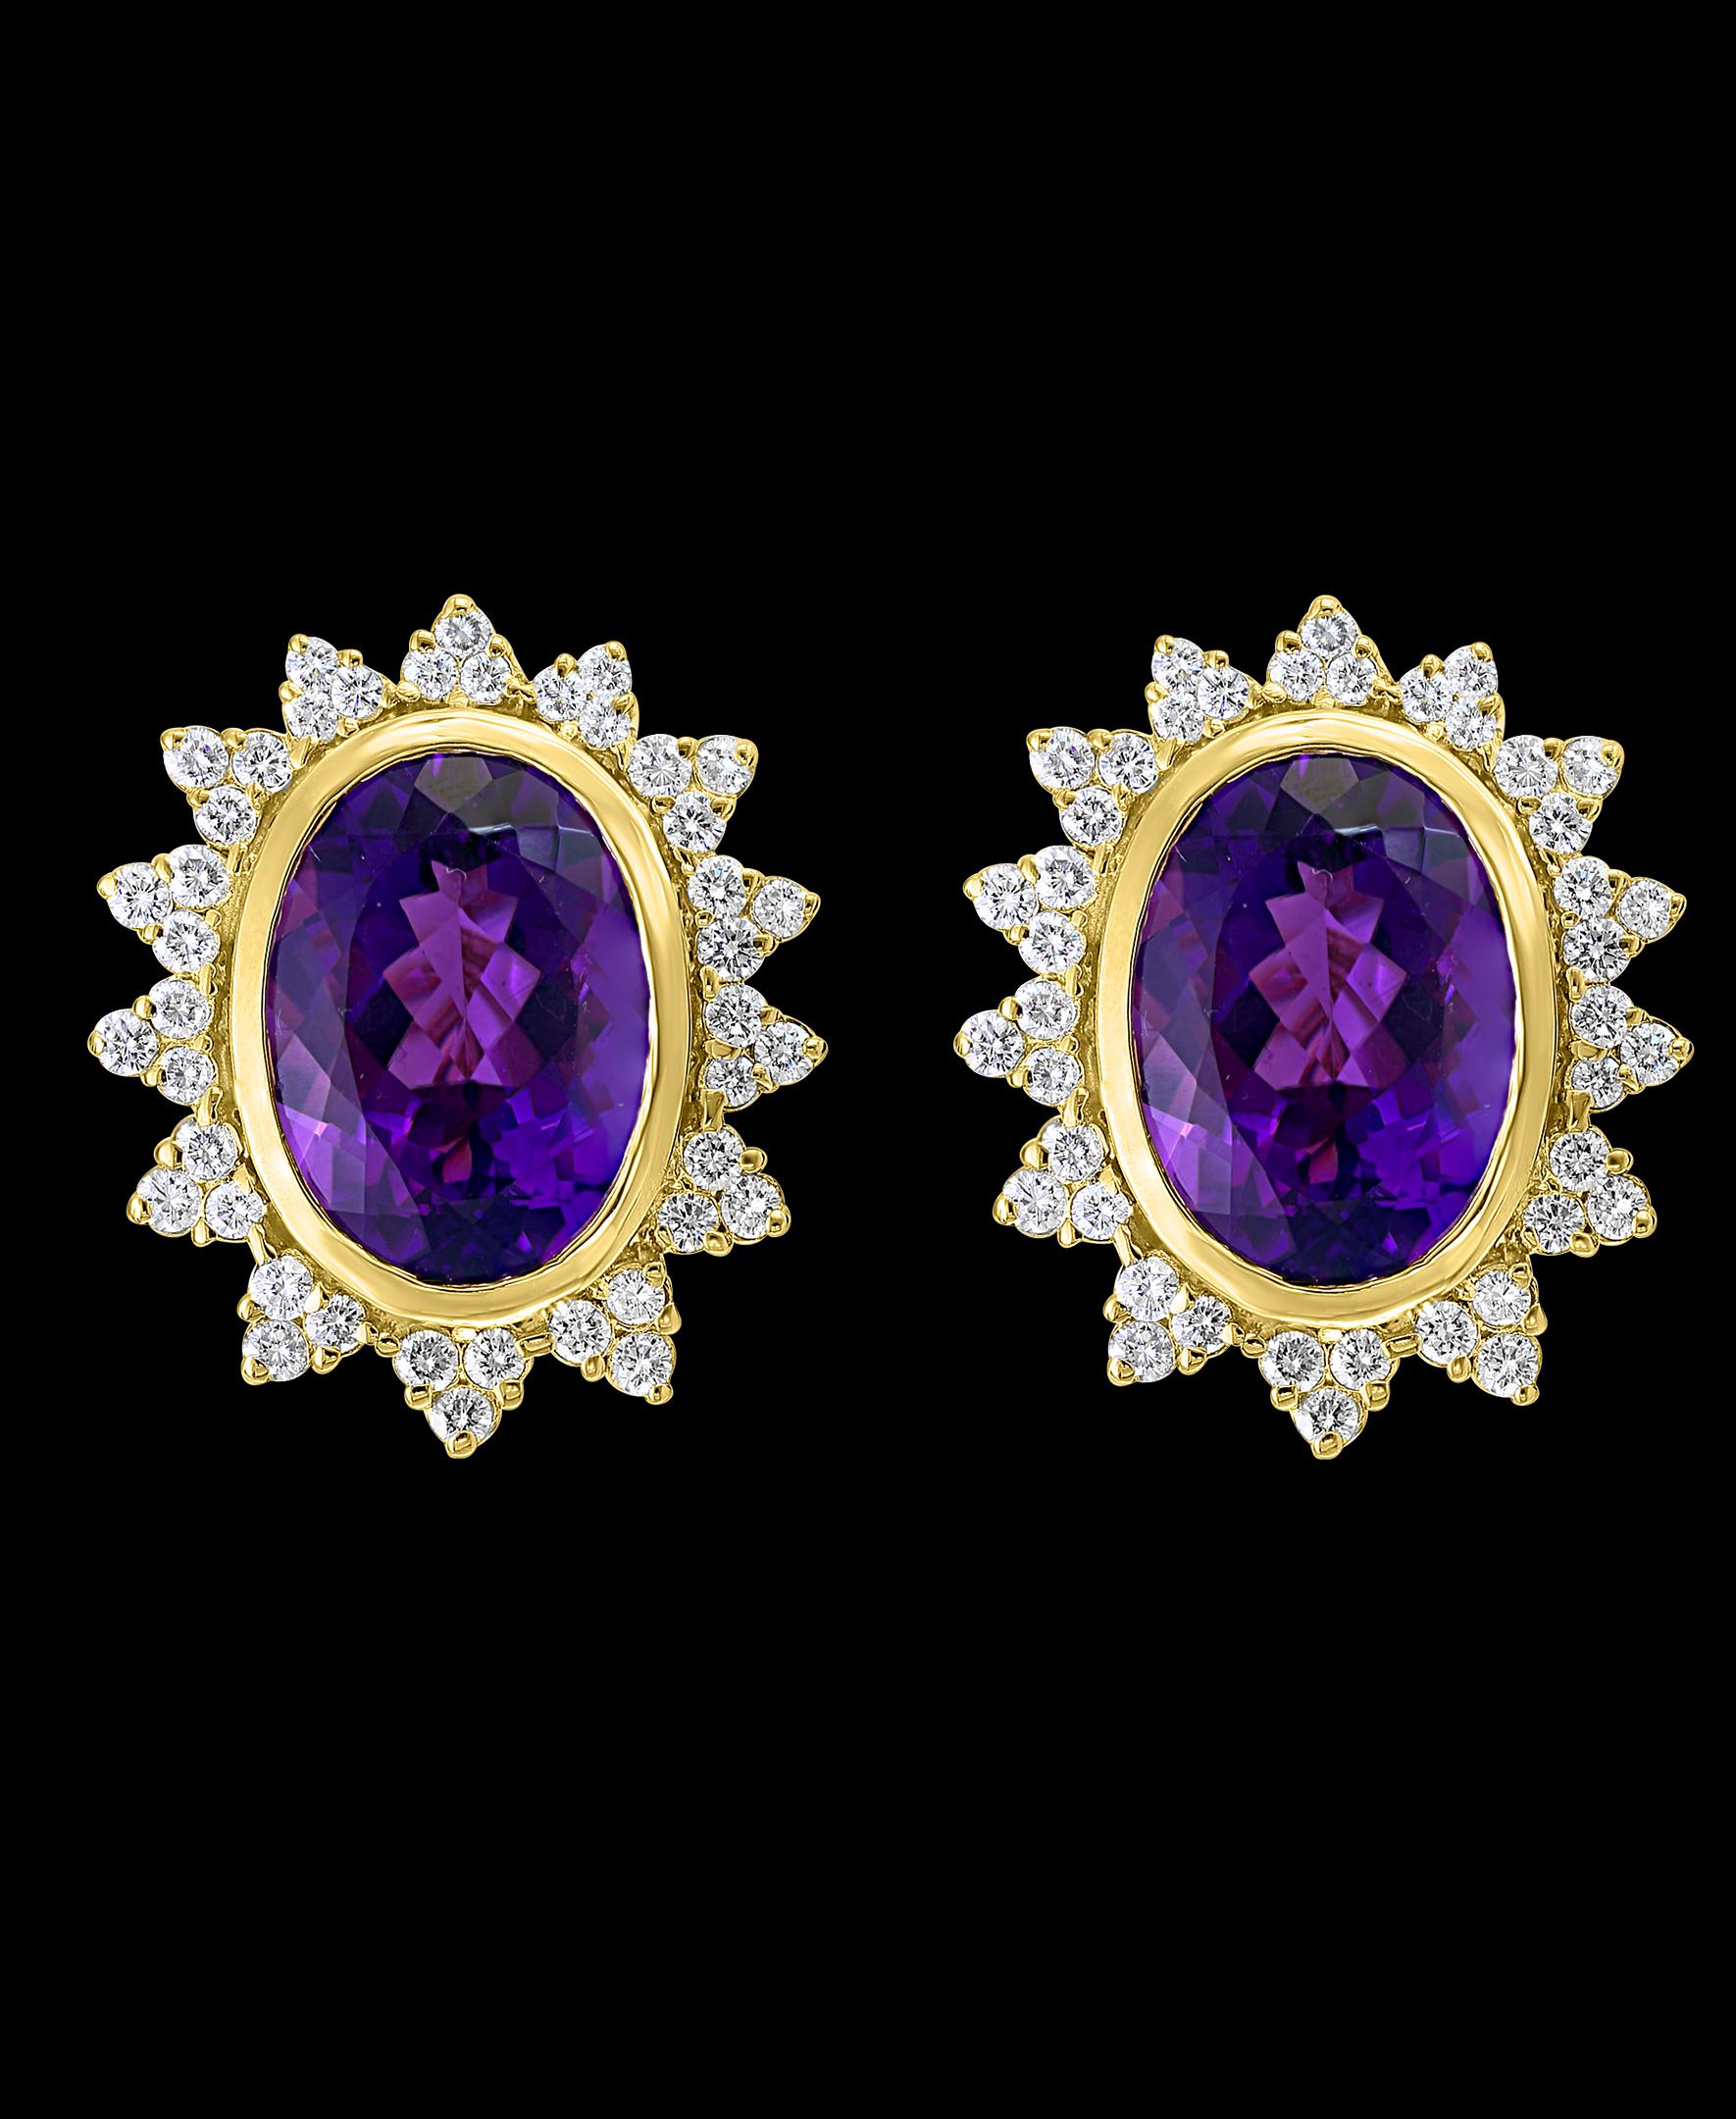 43 Carat  Natural Amethyst  & Diamond Cocktail  Earring , 18 Karat Yellow Gold
Very desirable color and quality.
perfect pair made in 18 Karat Yellow gold
Gold 29 Grams
 Diamonds: approximate 4.8 ct 
Earring  can be worn as Clip earrings as  we can